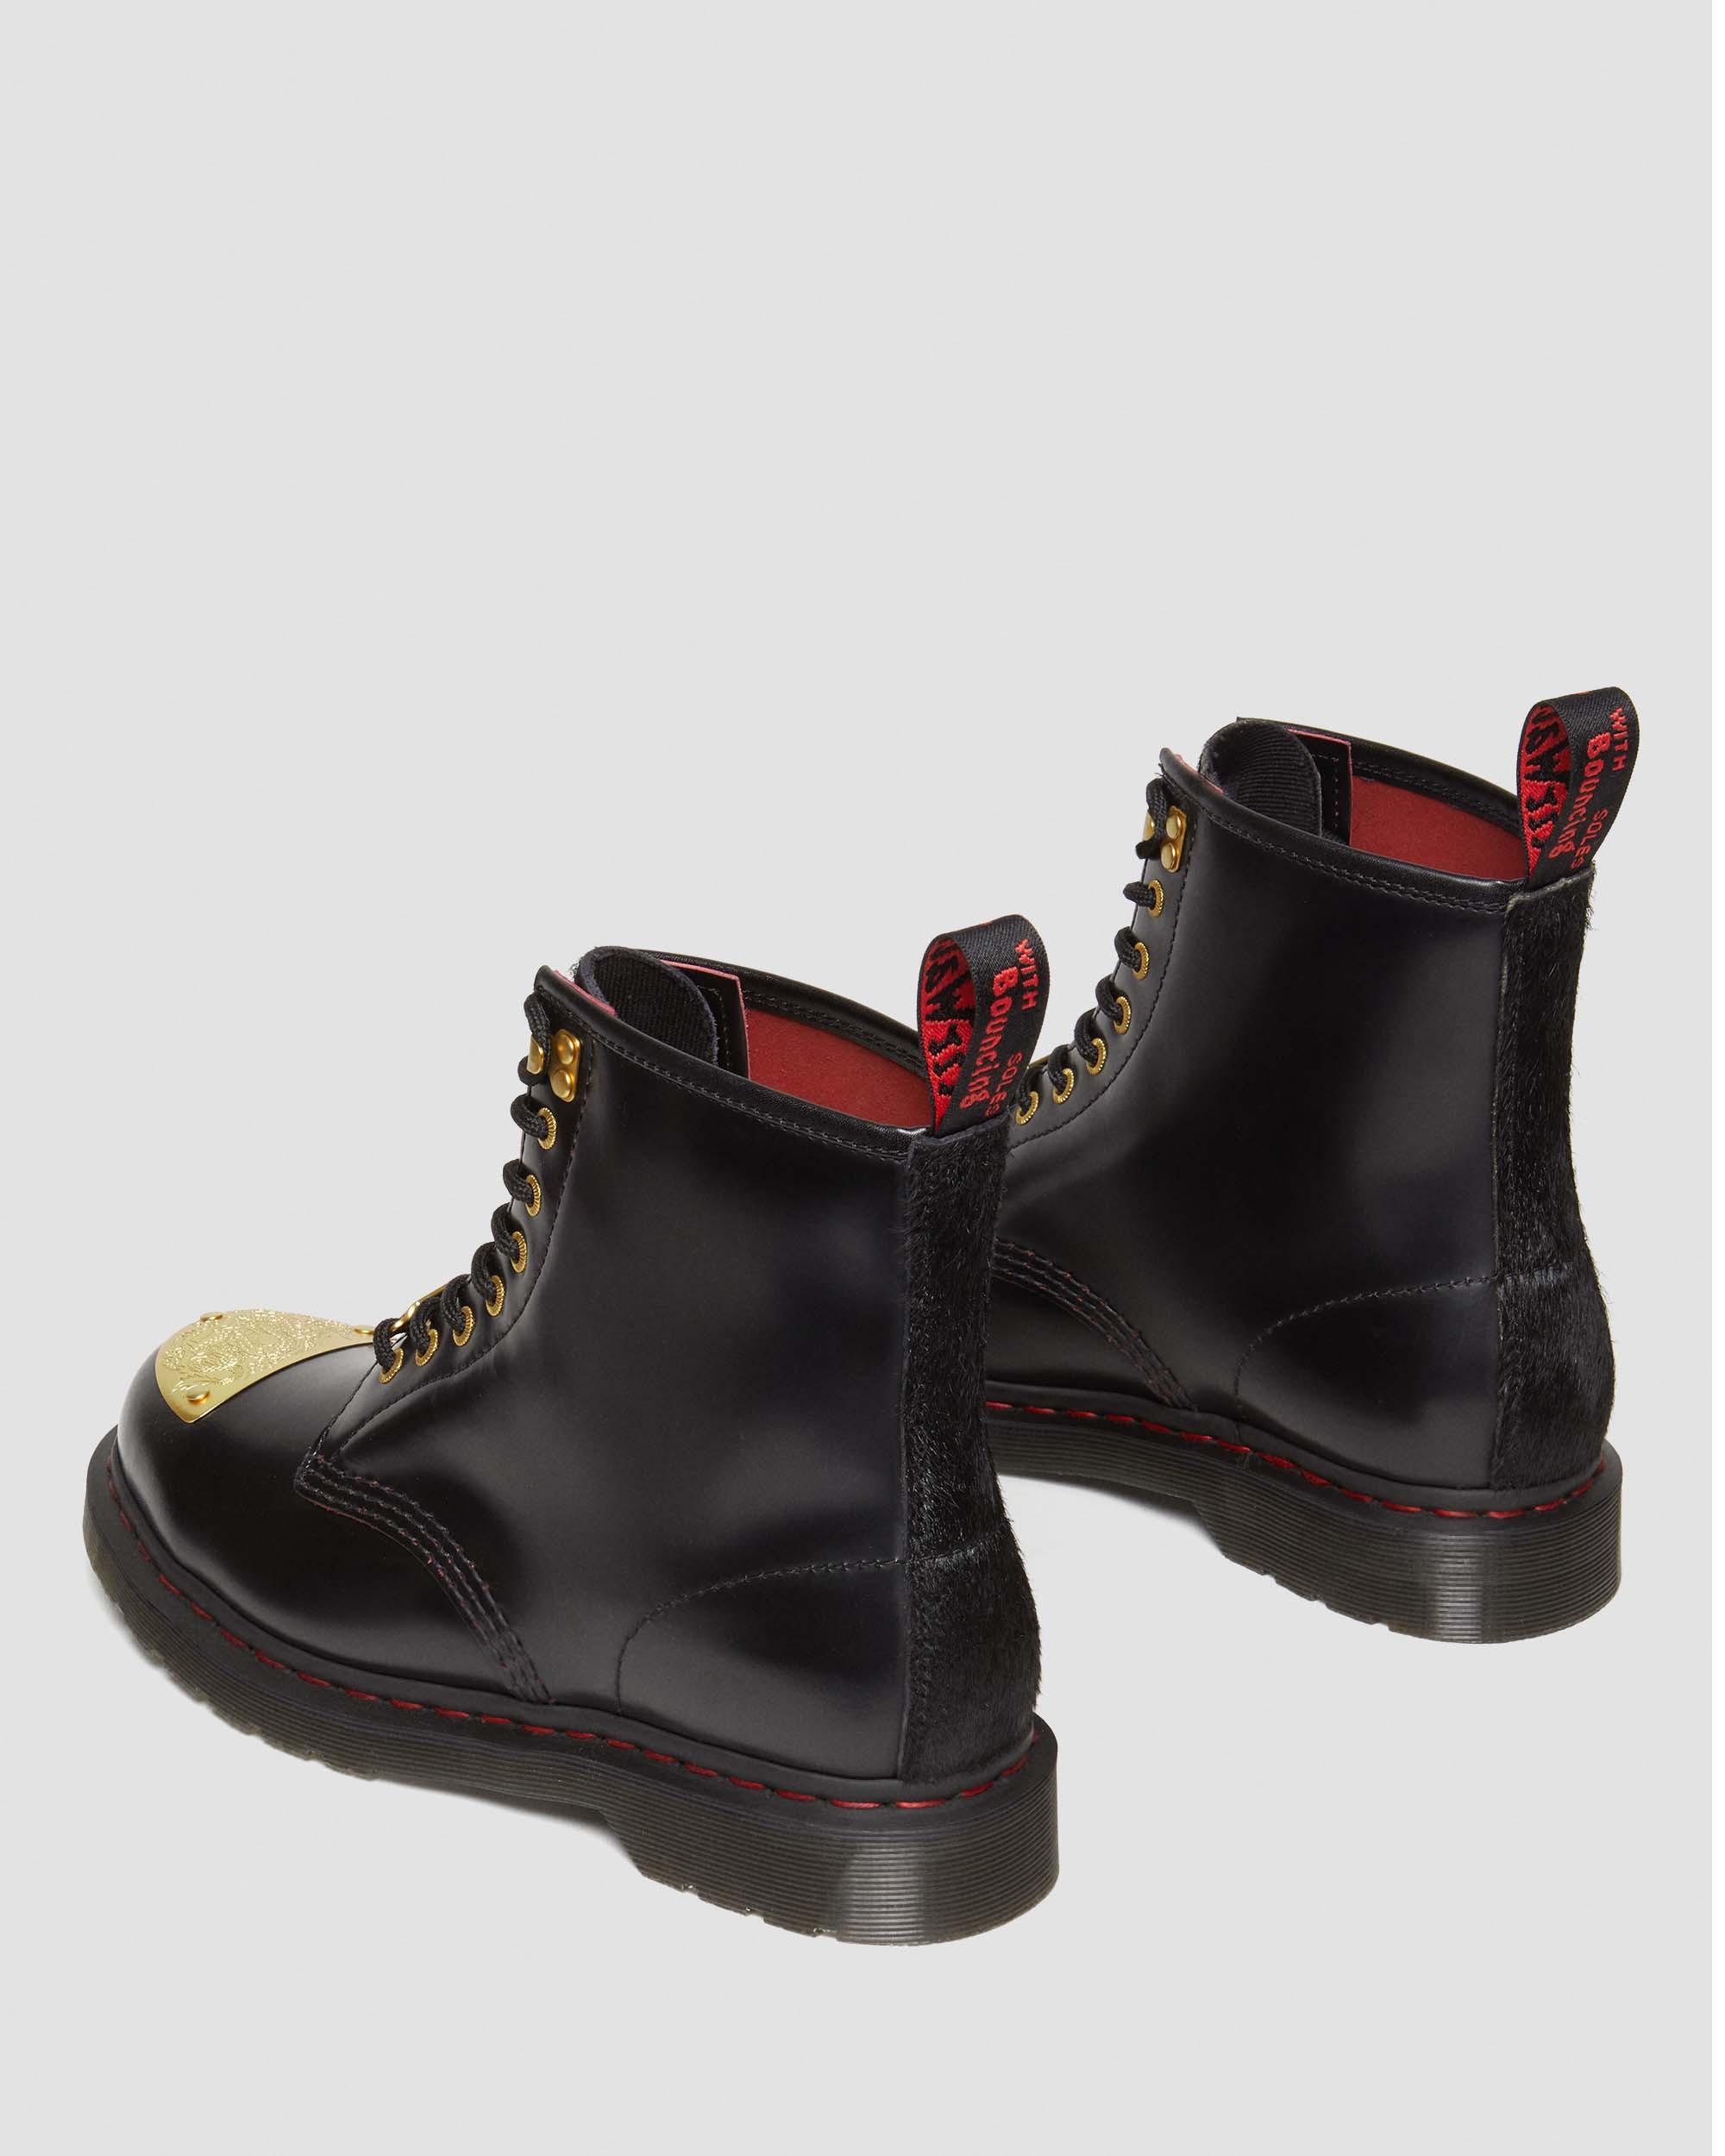 Dr. Martens Lunar New Year 1460 and 1461 Boots